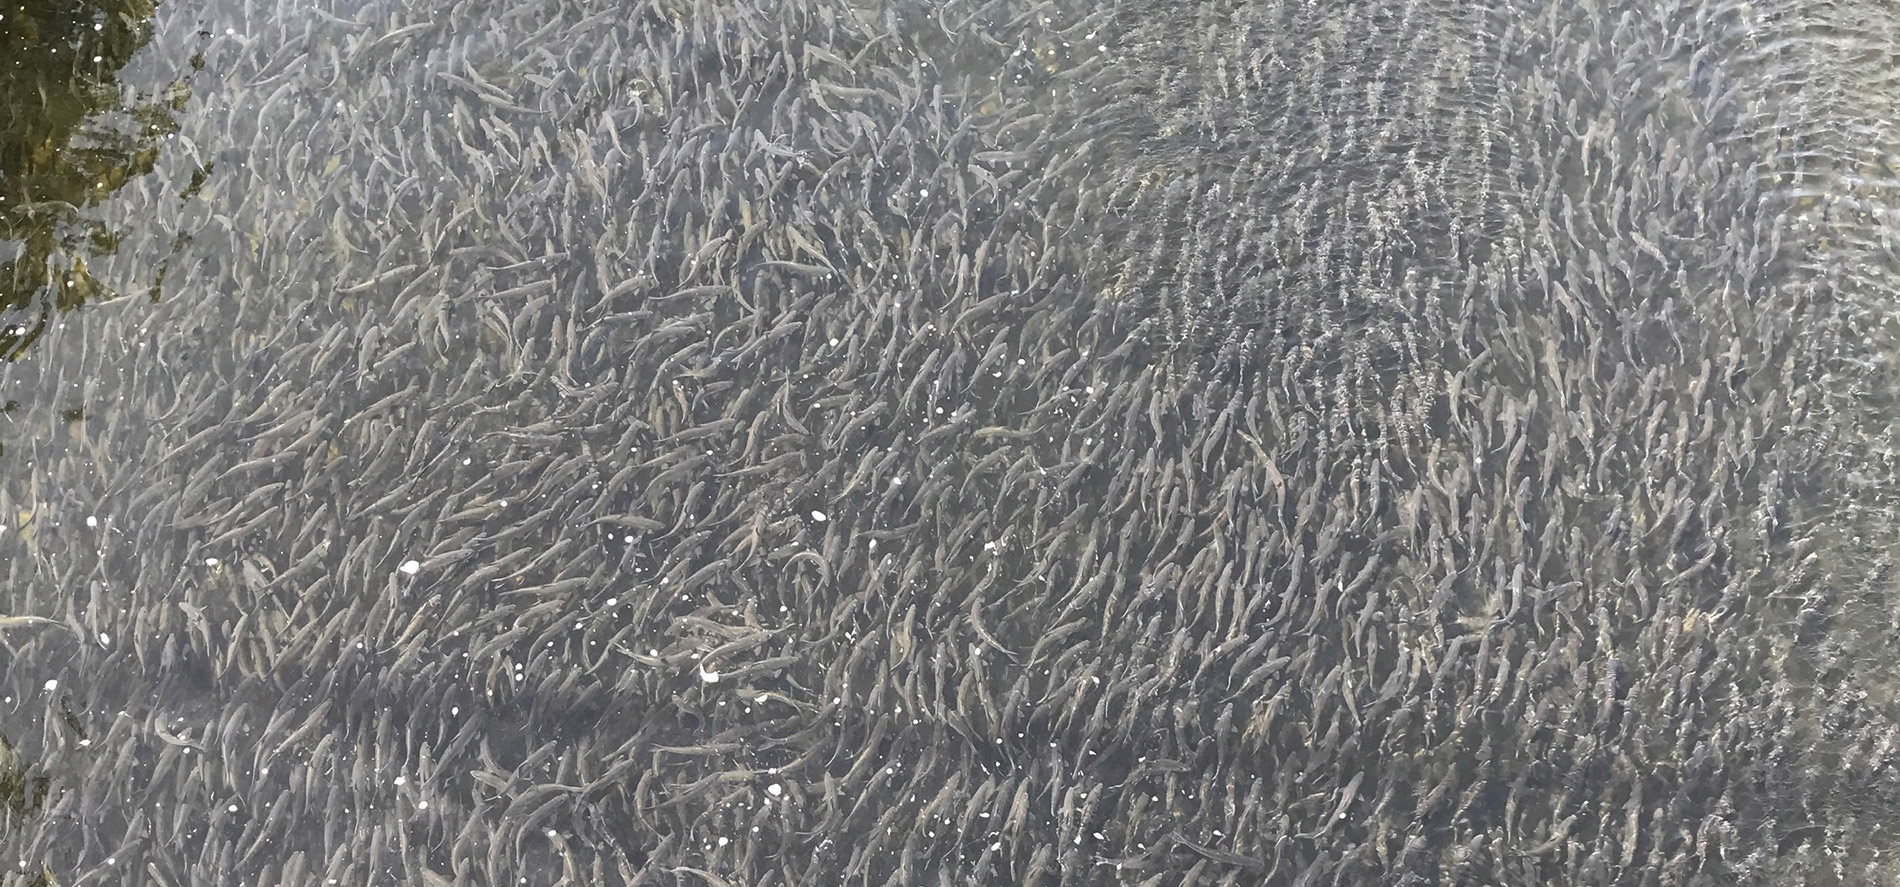 alewives in Maine rivers